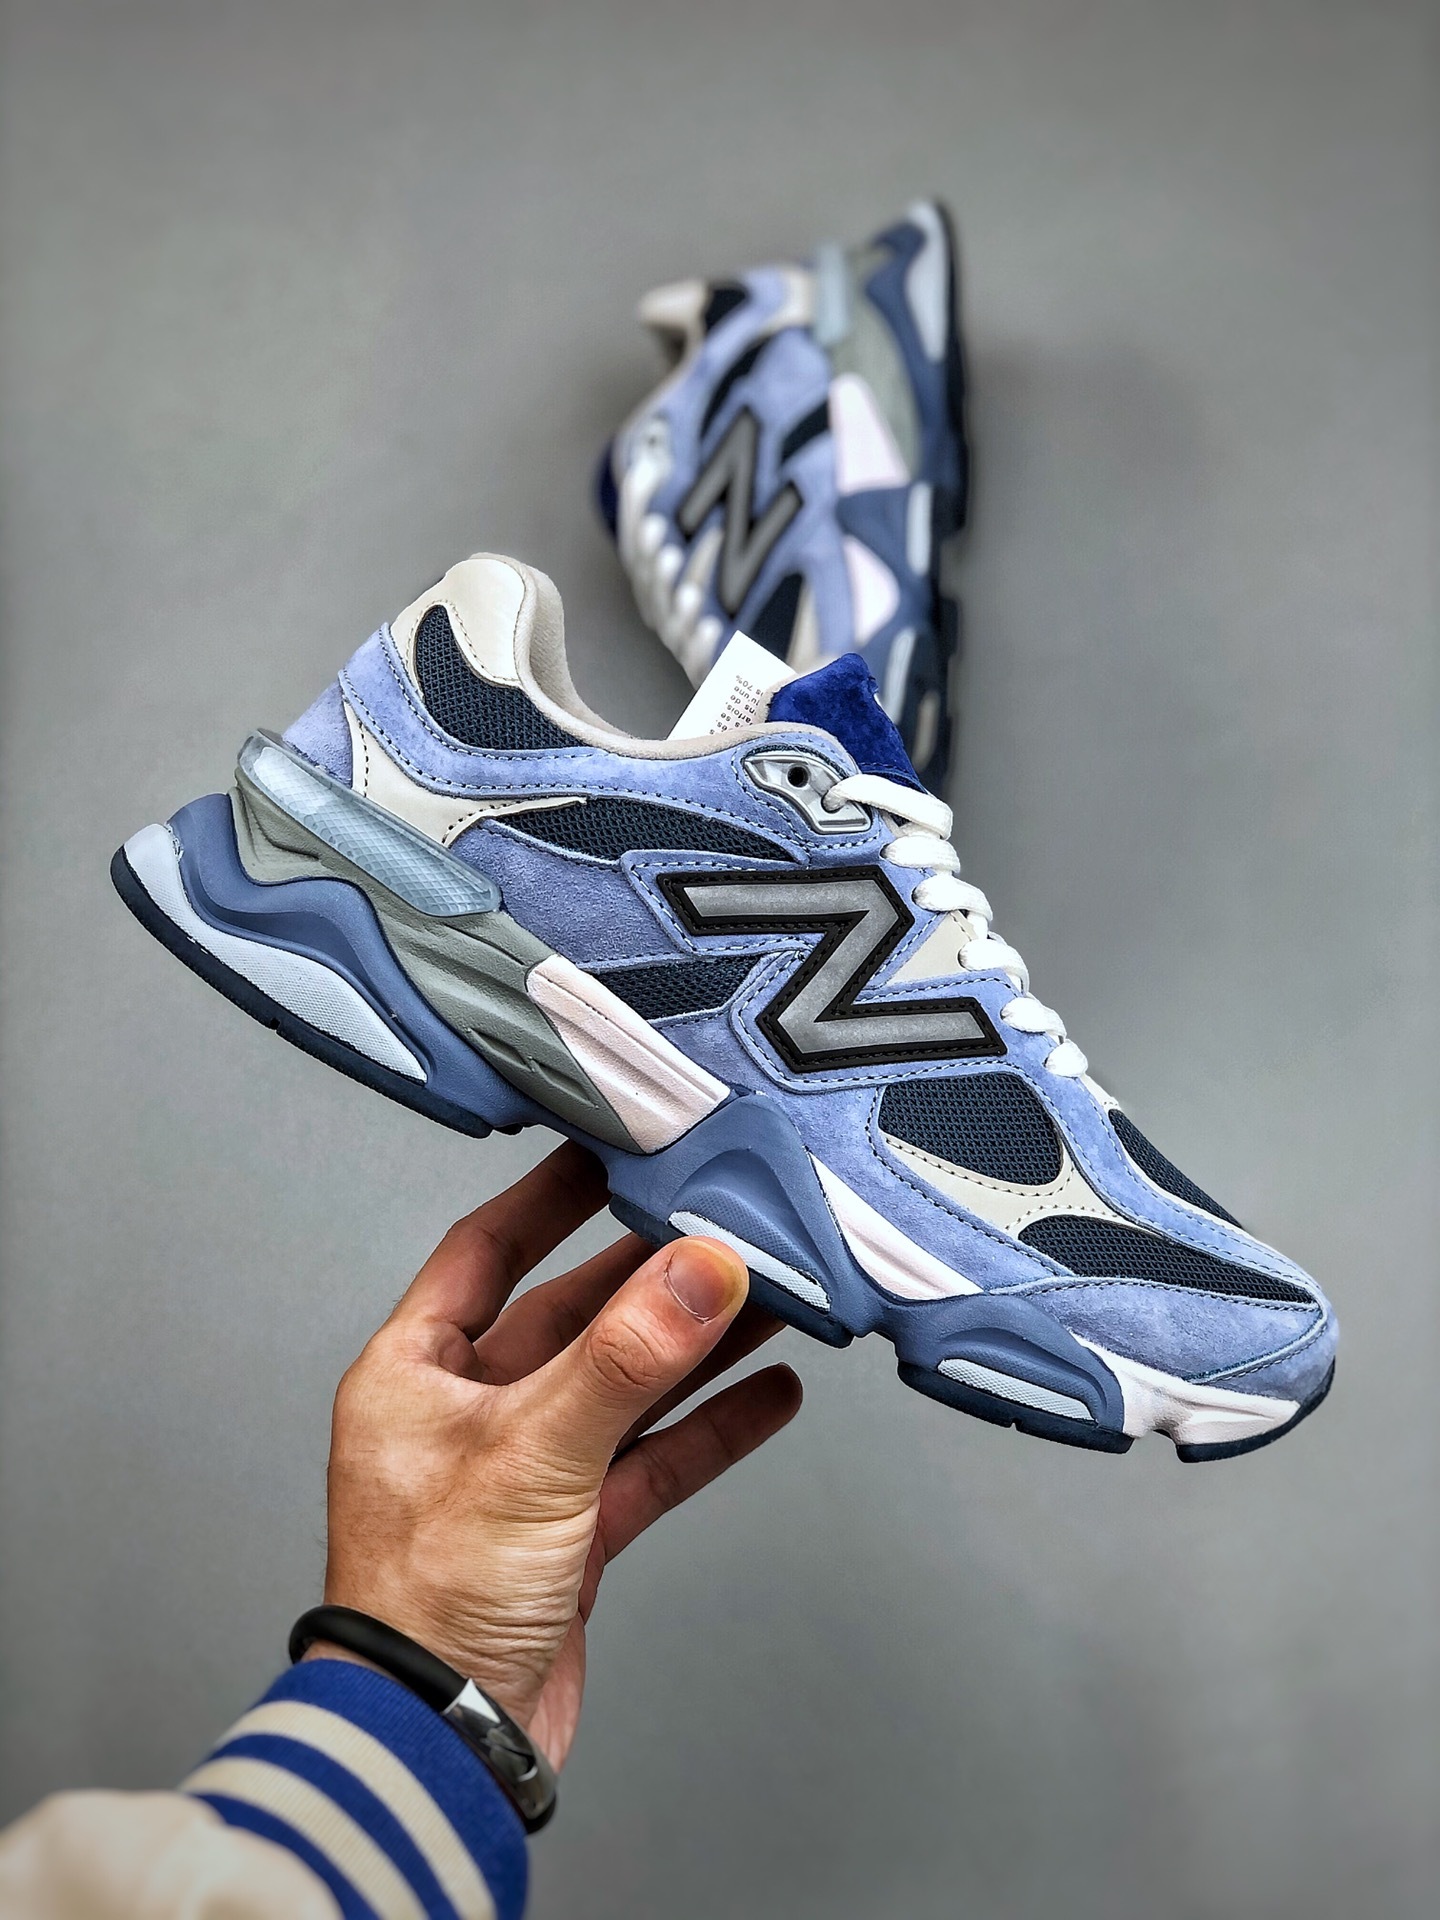 NB Joe Freshgoods x New Balance NB9060.  Online purchase of sports shoes with suitable prices NB Joe Freshgoods x New Balance NB9060.  Online purchase of sports shoes with suitable prices 30,New Balance NB9060,Sports shoes,NB shoes